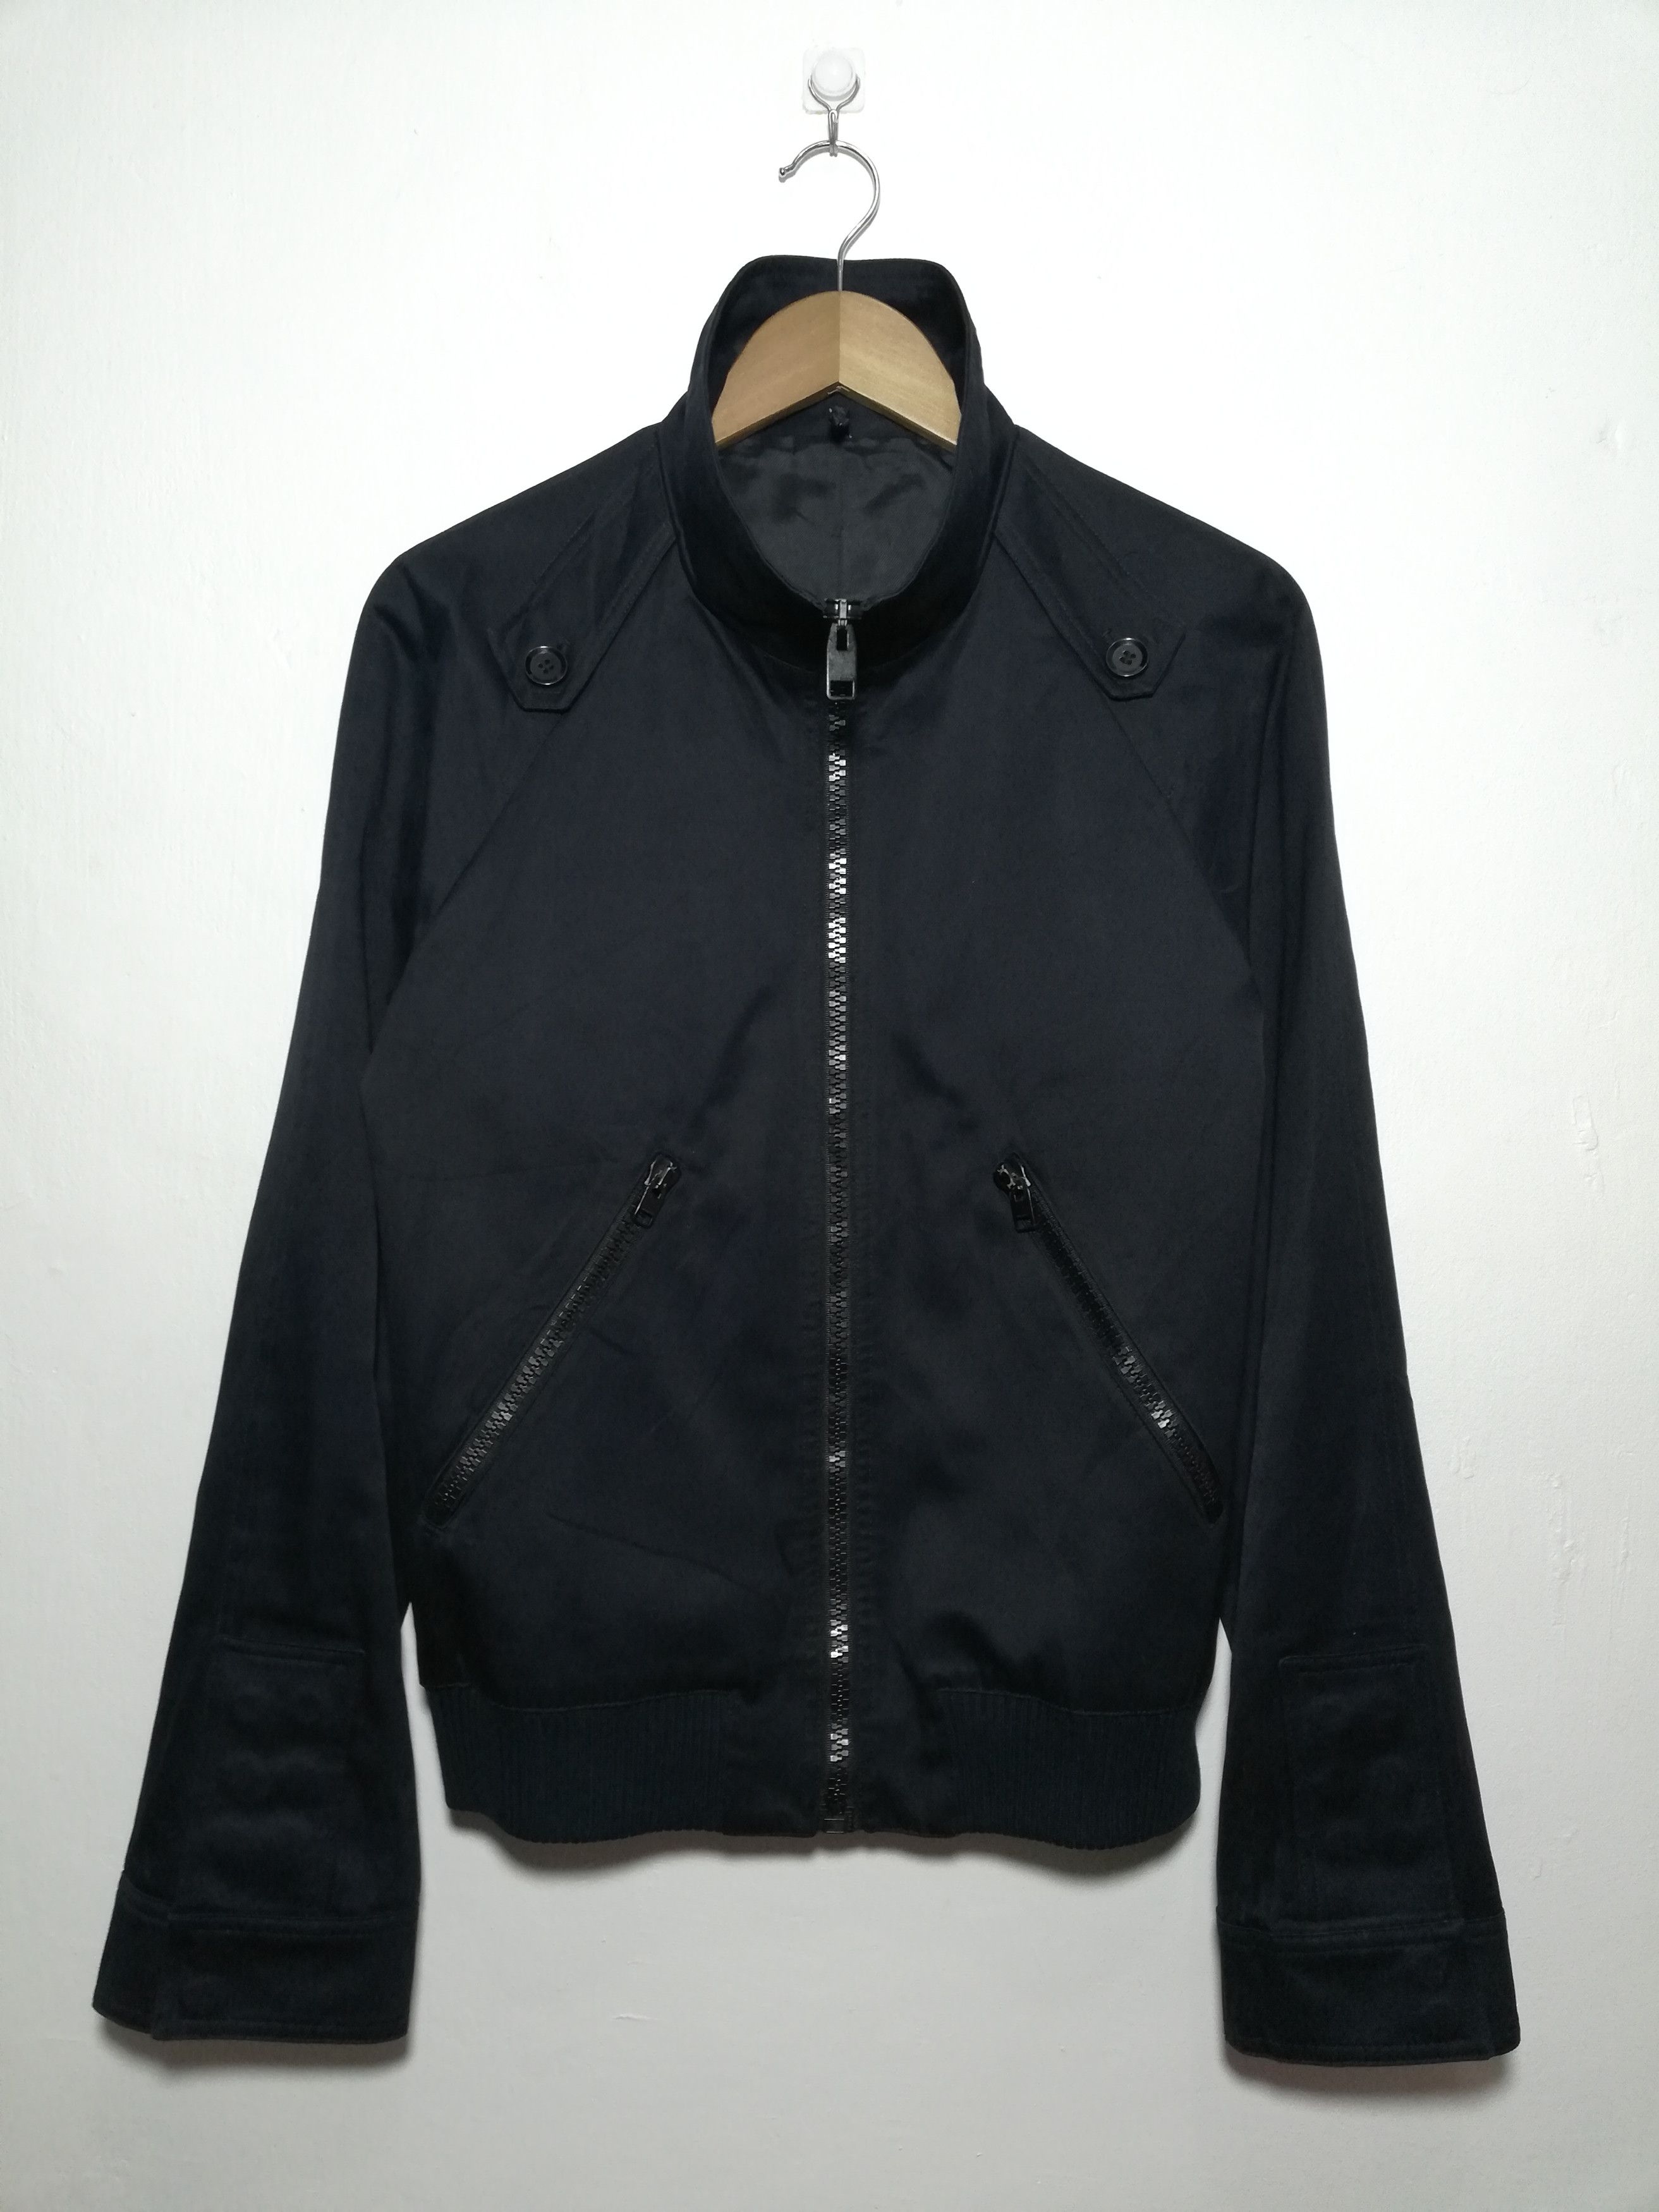 Dior Homme SS07 Bomber Jacket - 2